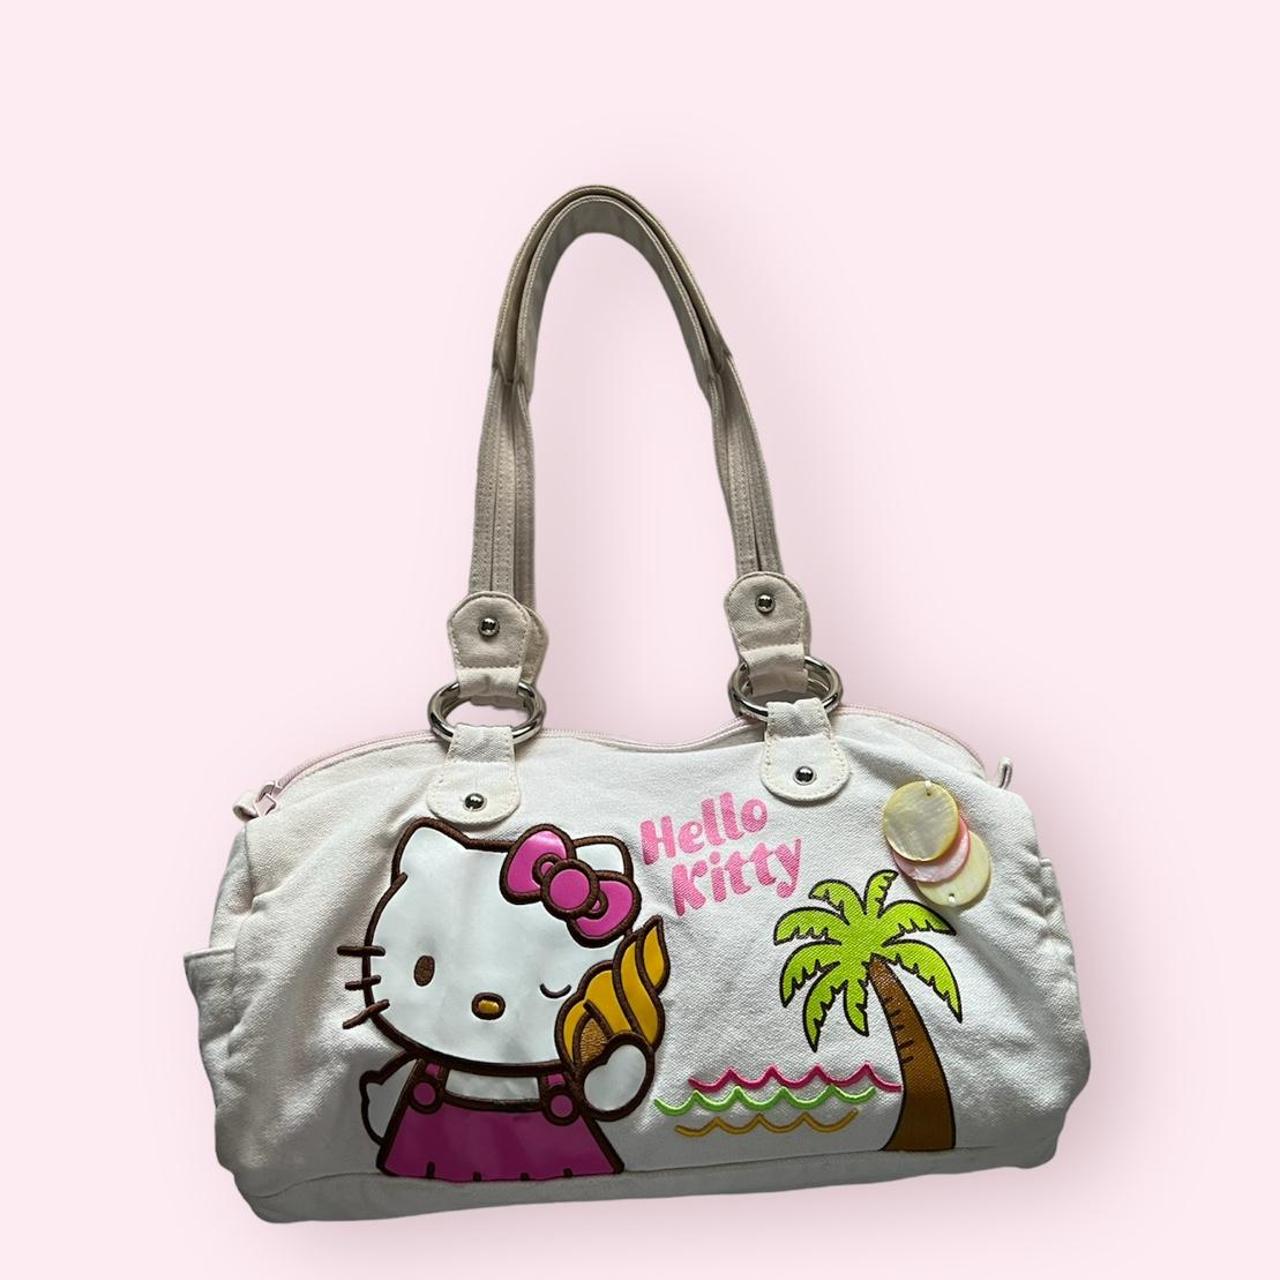 Hello Kitty Leather Exterior Bags & Handbags for Women for sale | eBay